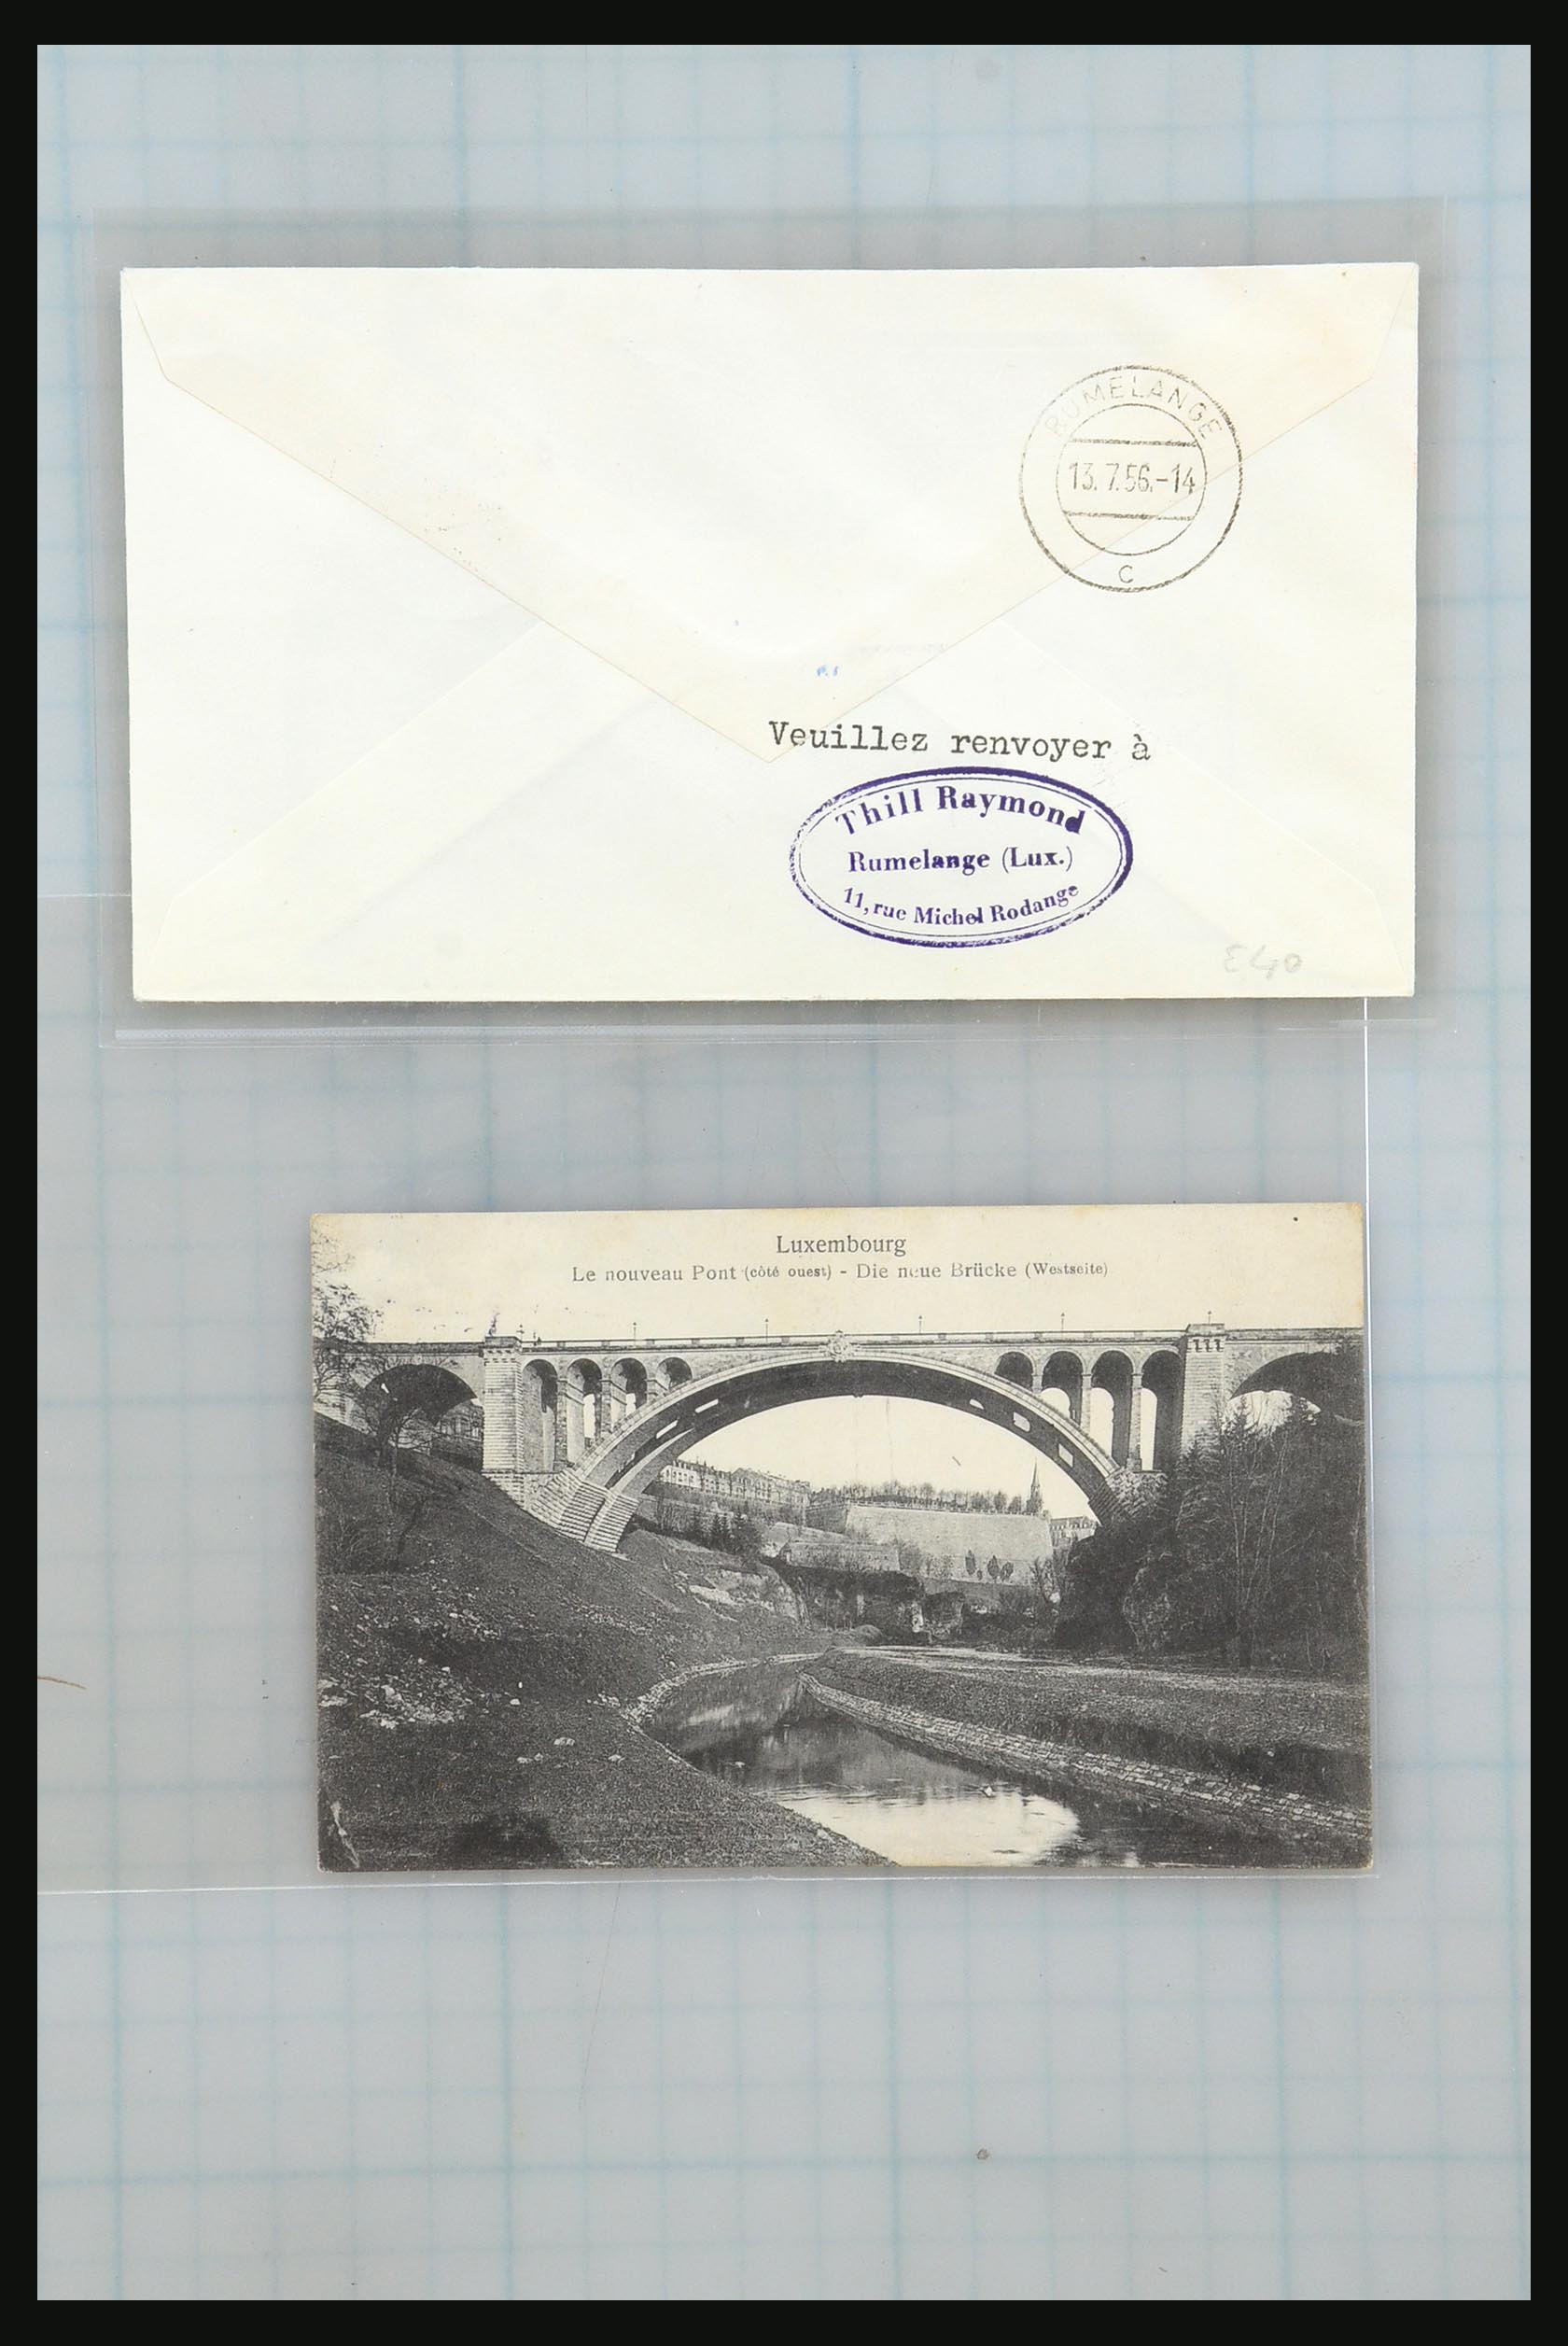 31358 078 - 31358 Portugal/Luxemburg/Greece covers 1880-1960.